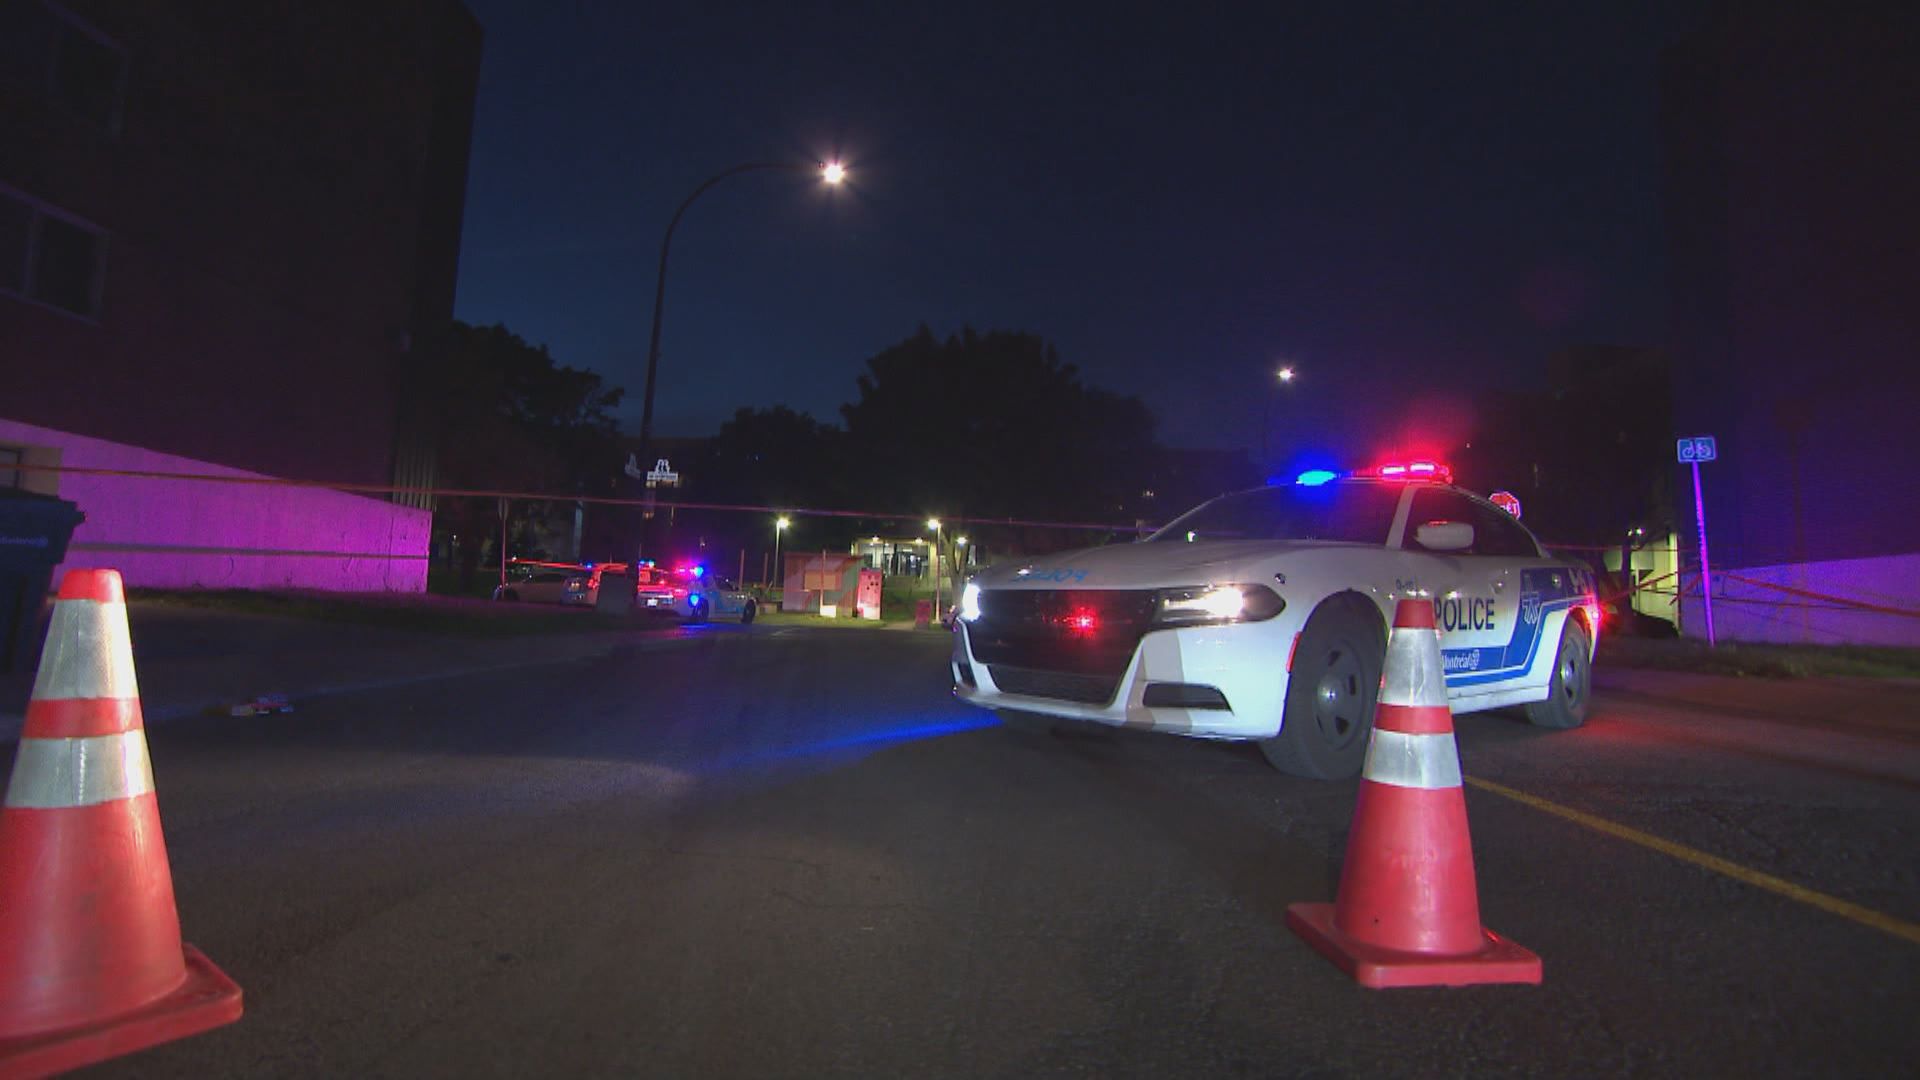 Man shot and killed in front of crowd on Montreal basketball court: police